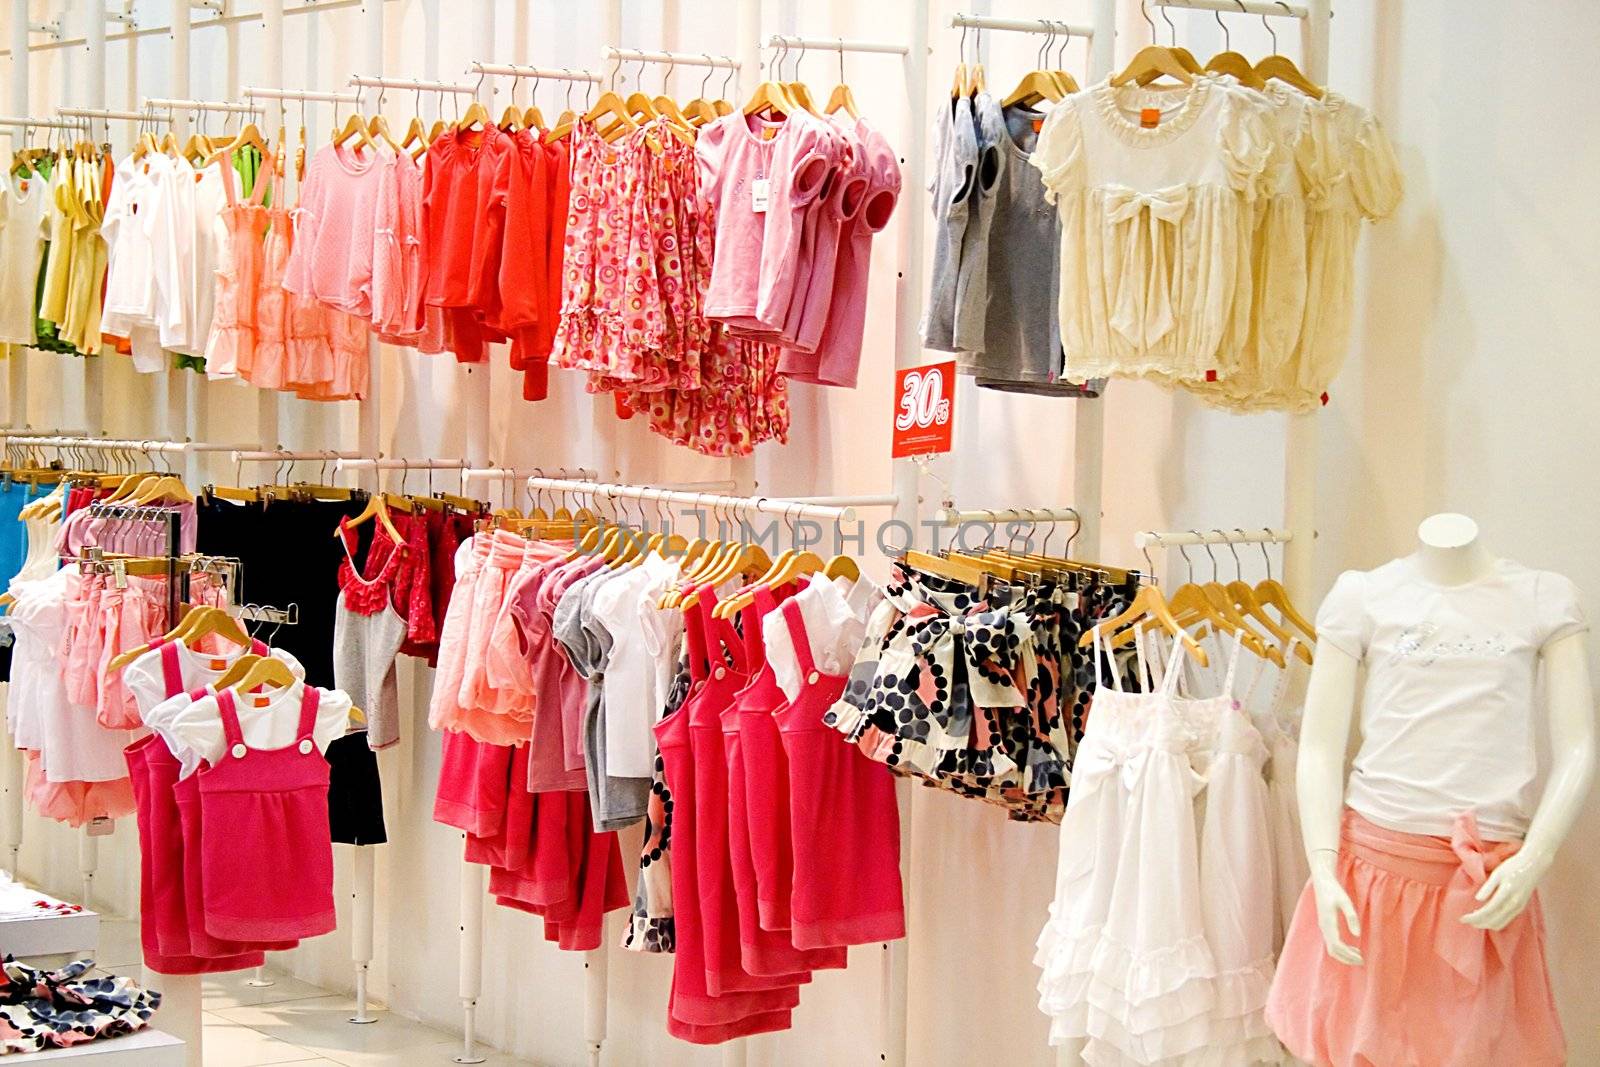 Image of children's clothes in a shop.